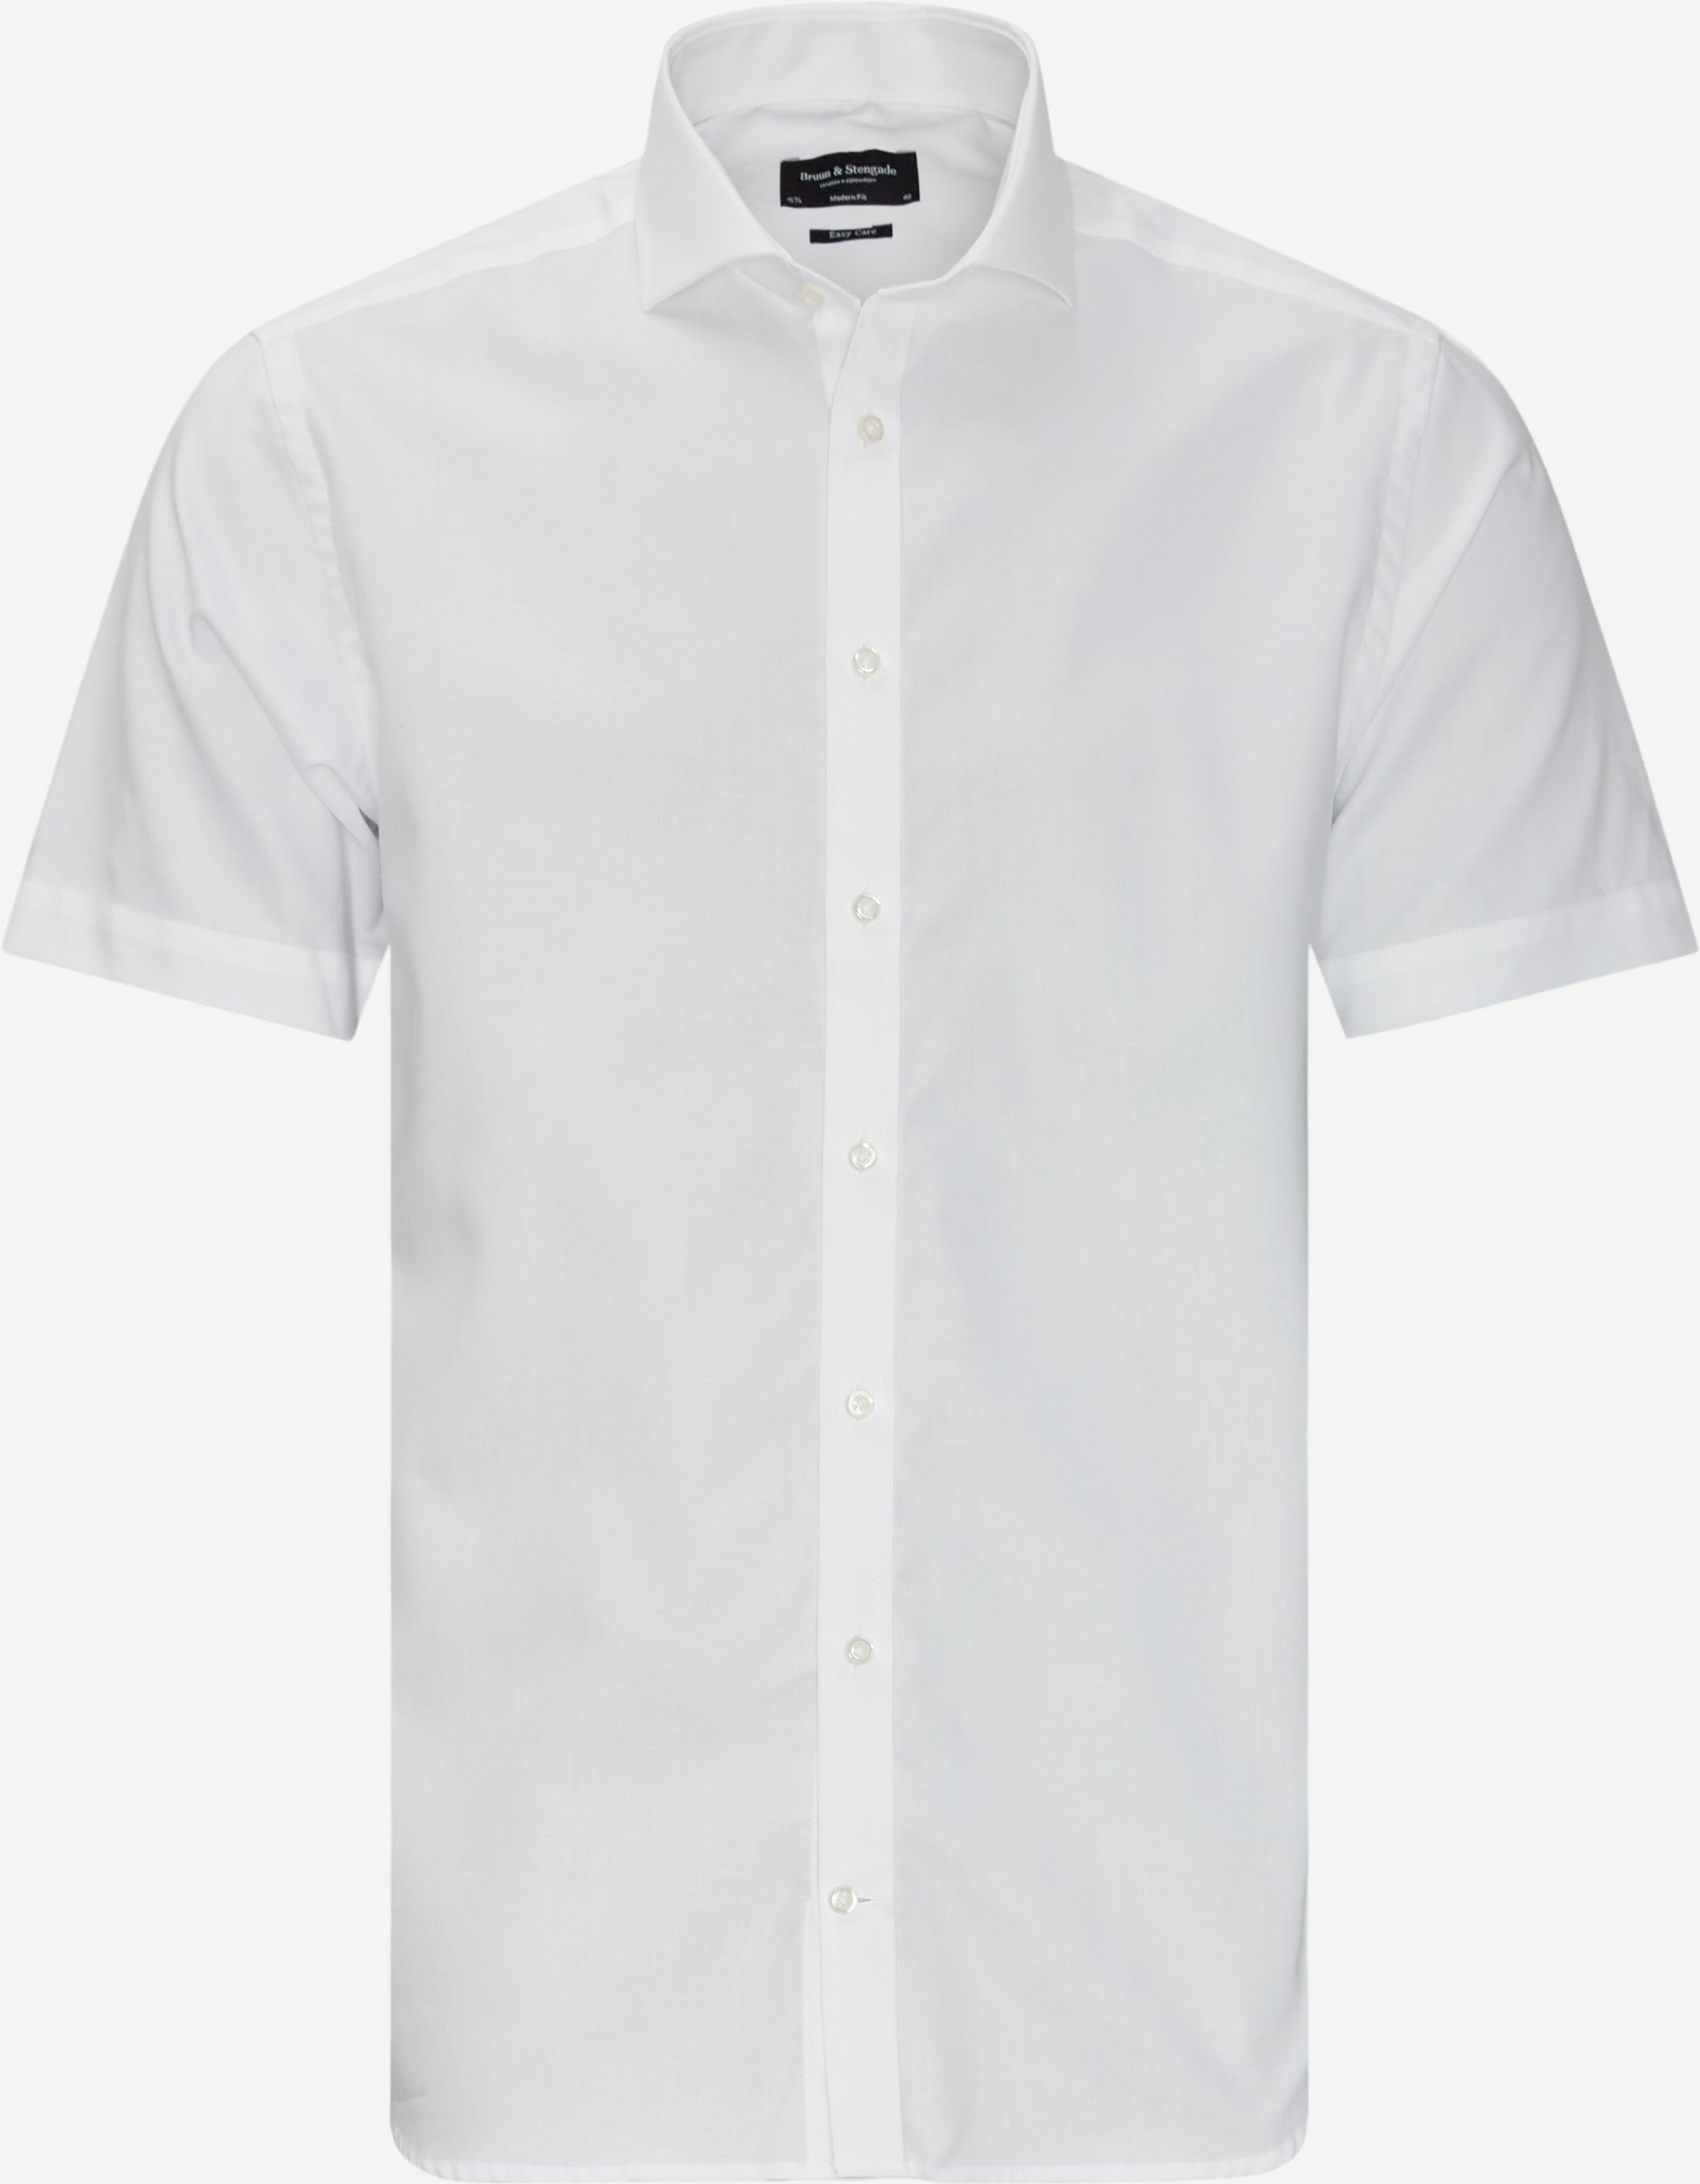 Short-sleeved shirts - Modern fit - White